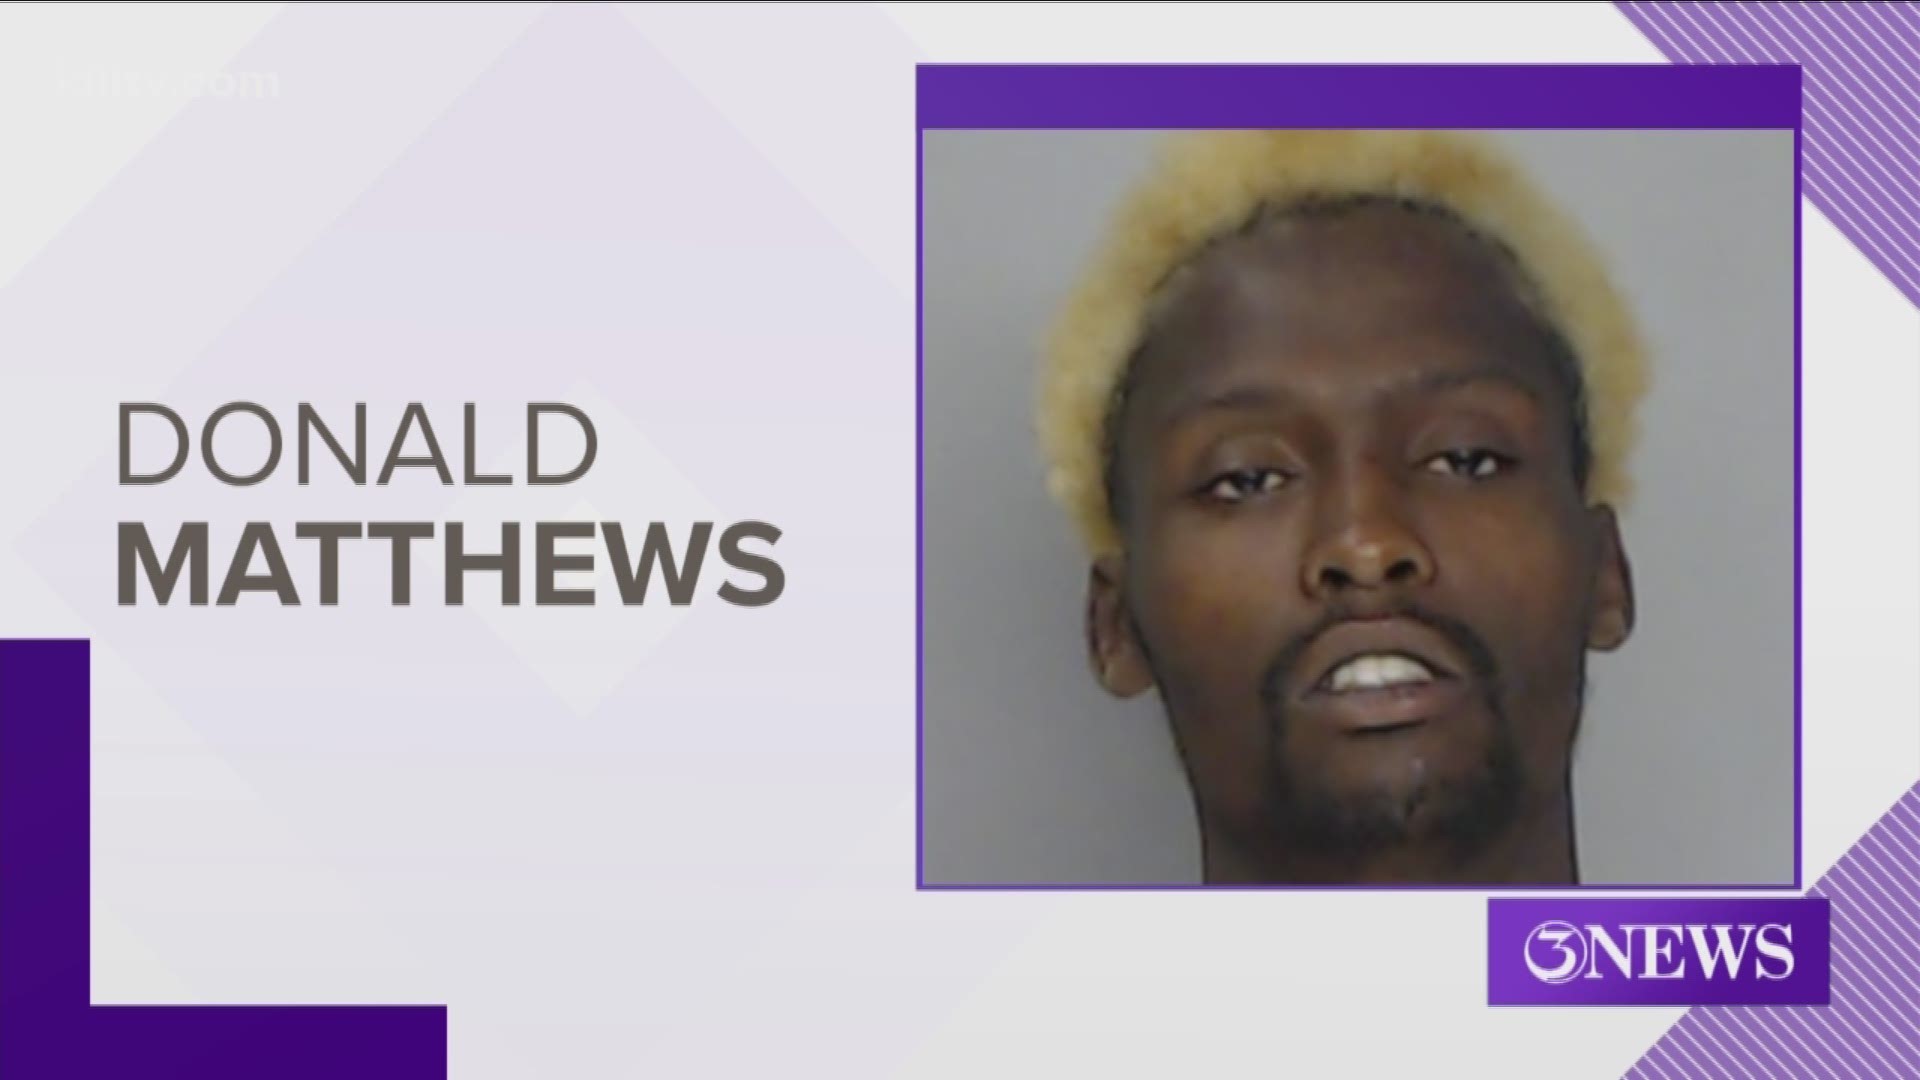 The Corpus Christi Police Department has made an arrest in connection with the murder of a 54-year-old woman whose body was discovered Wednesday, June 12, in the 2000 block of Leopard Street.